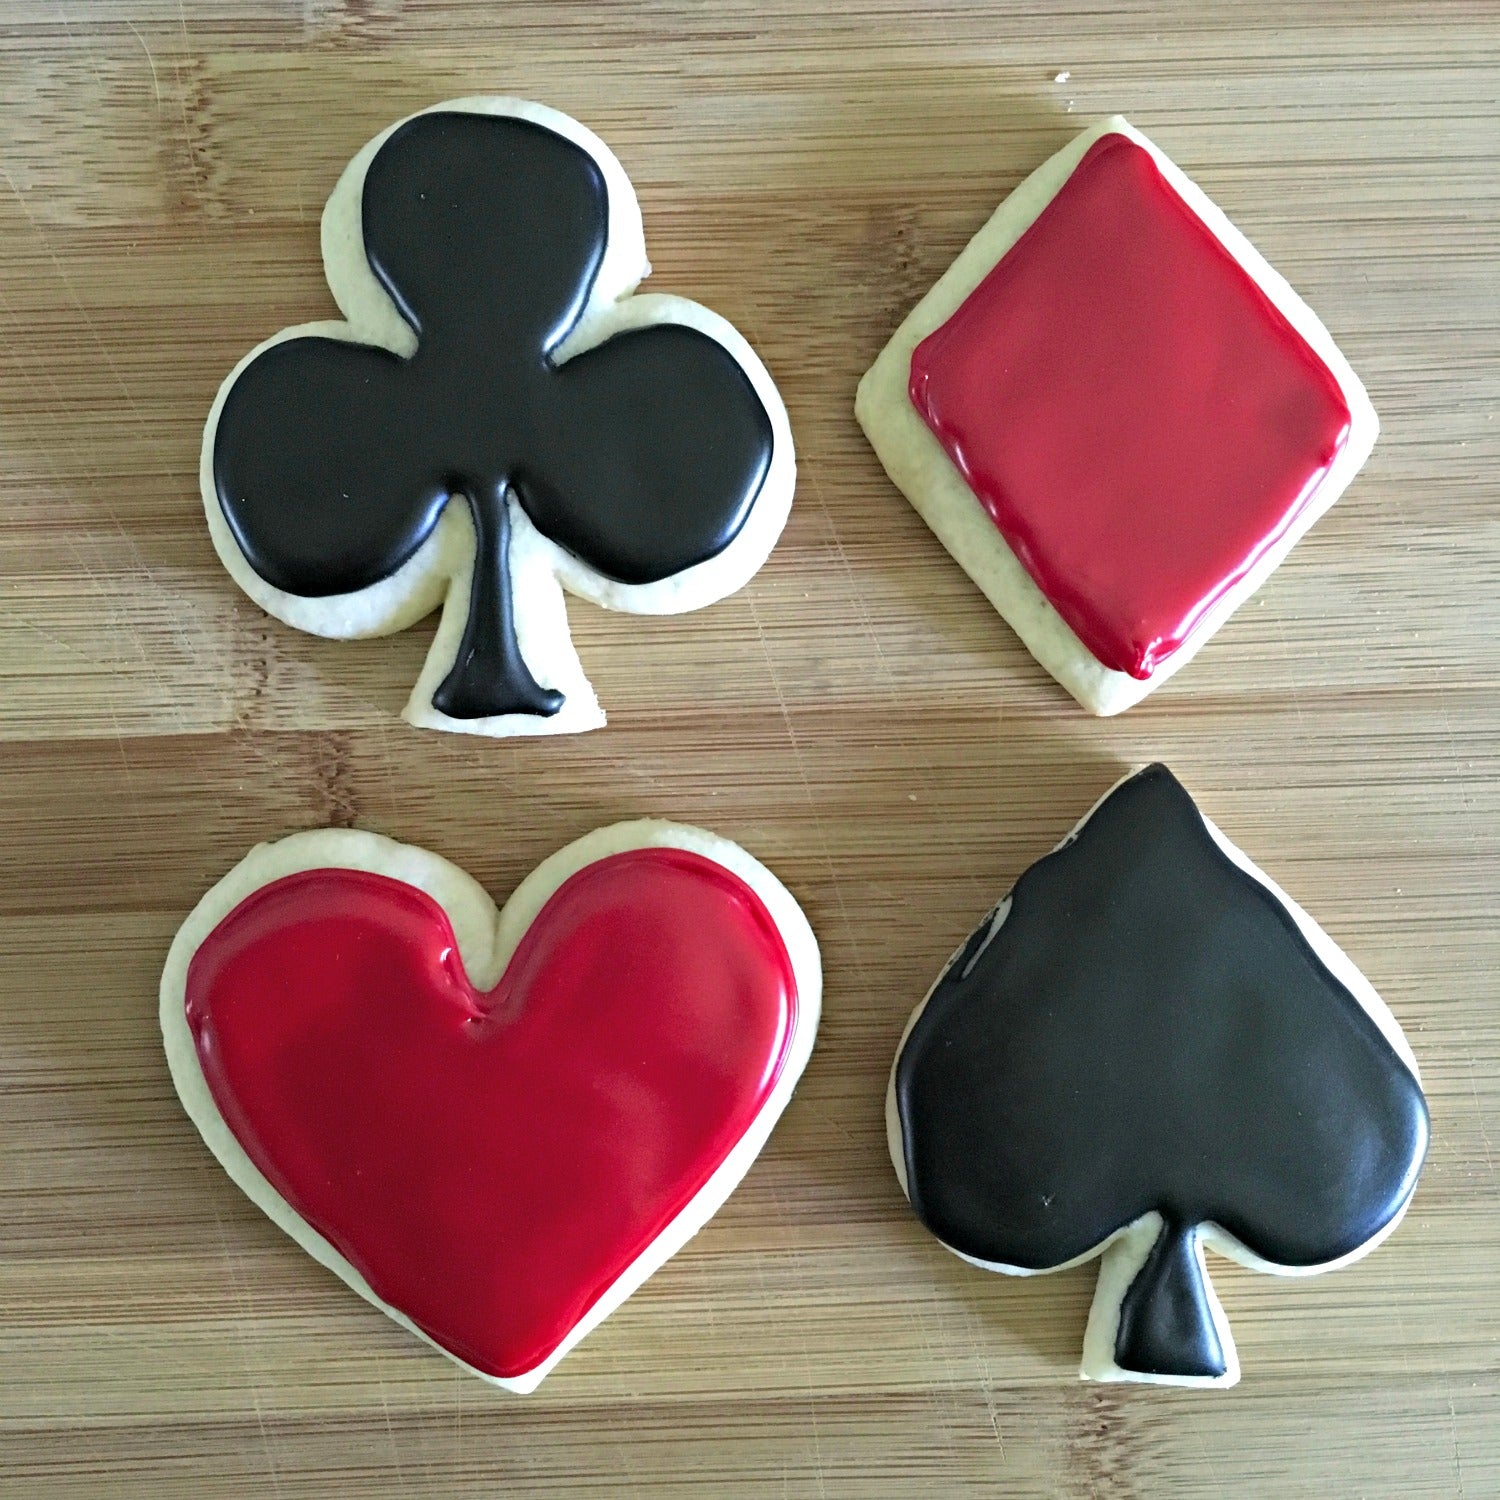 Cookies Playing Cards